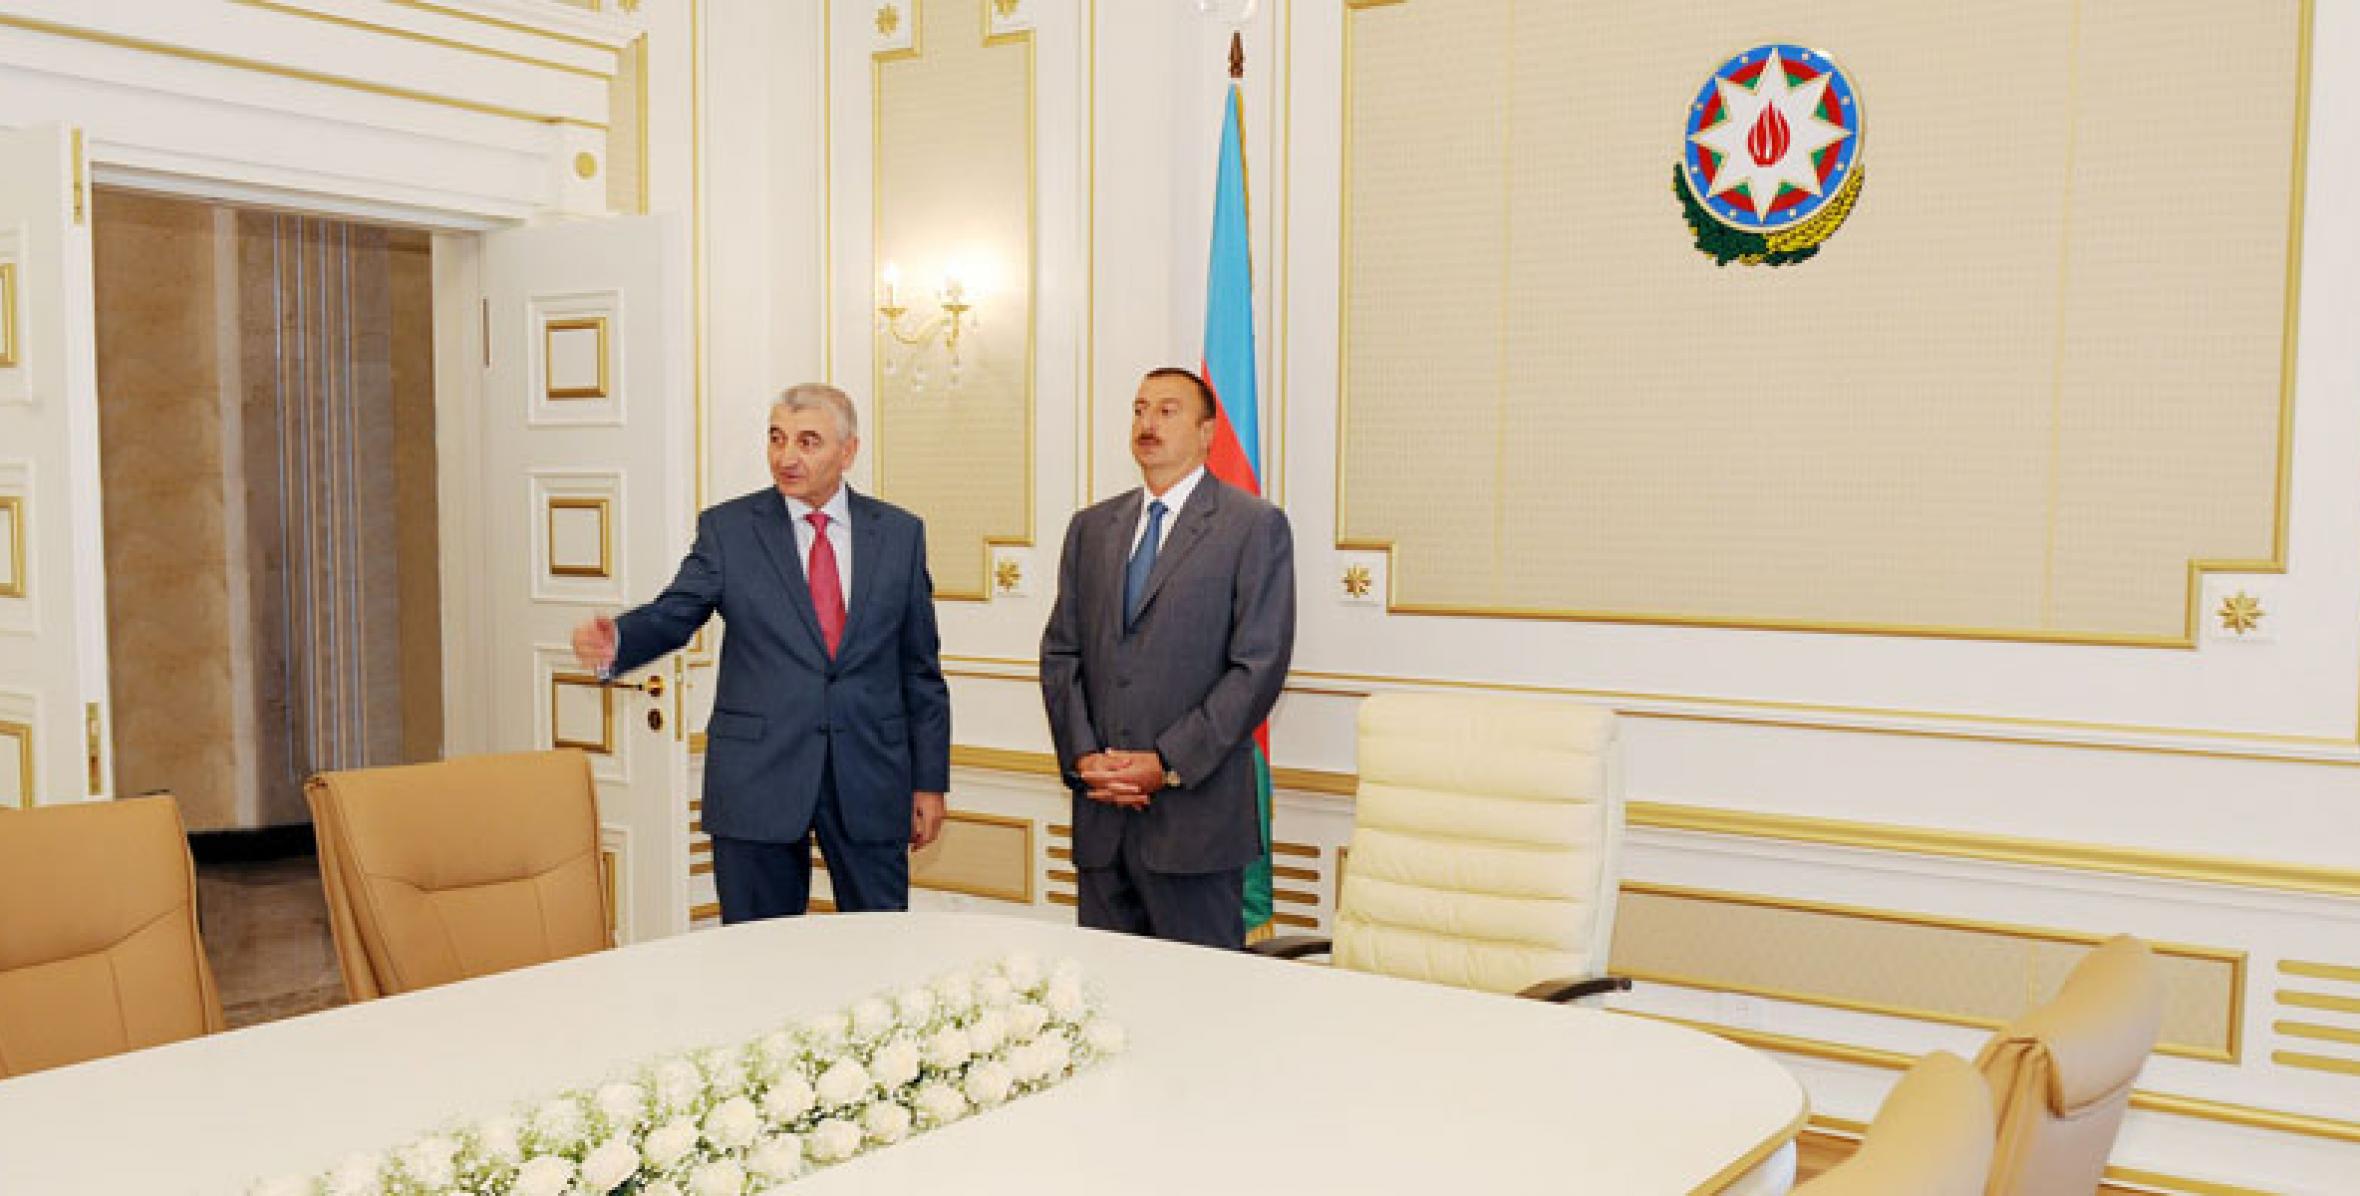 Ilham Aliyev attended the opening ceremony of the administrative building of Central Election Commission